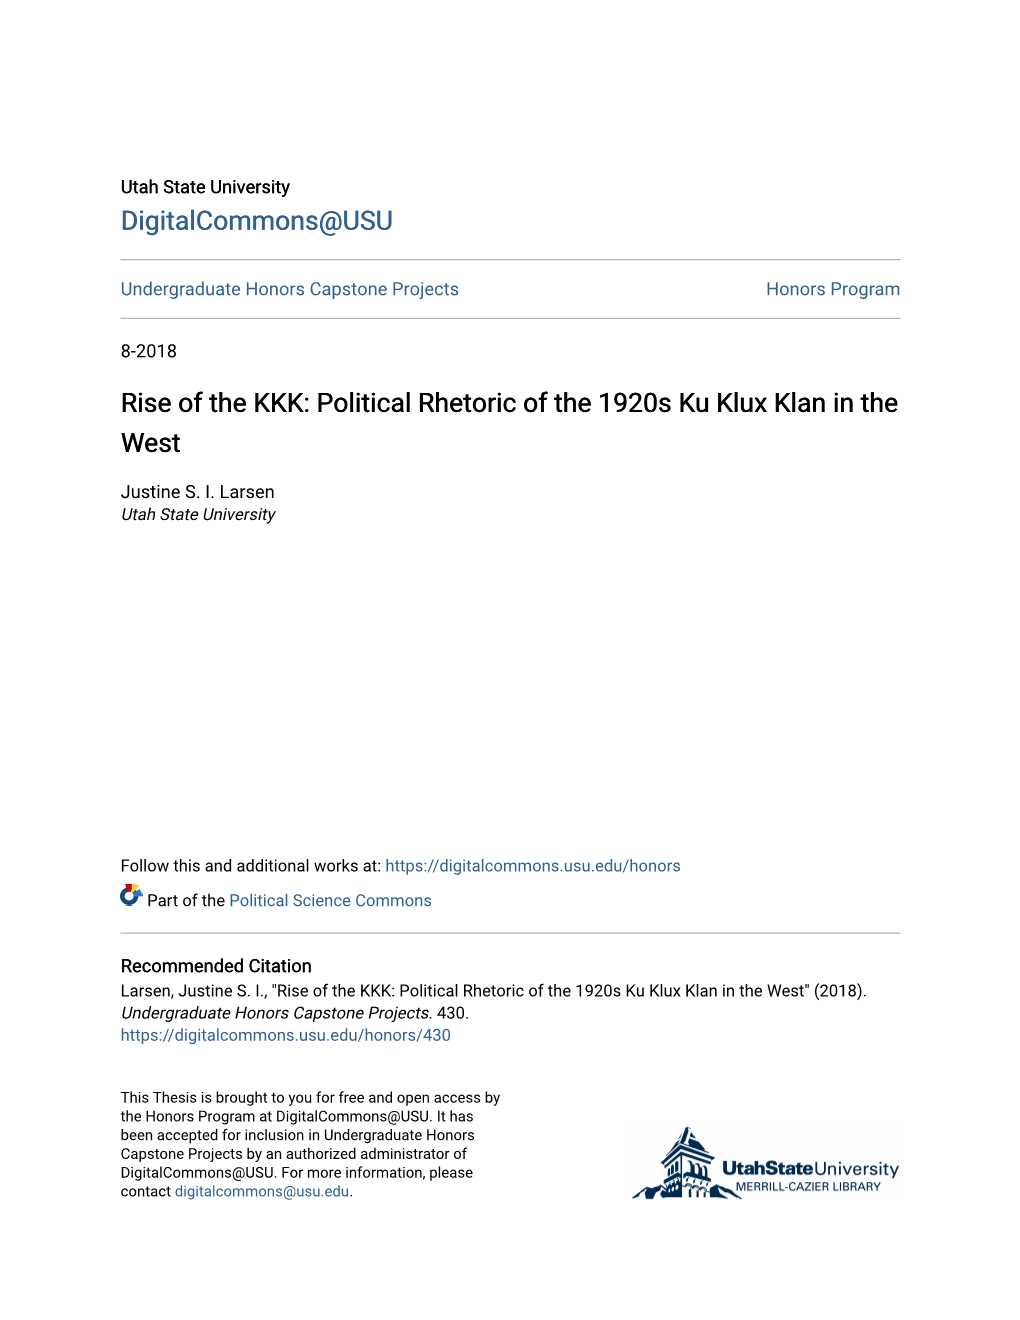 Rise of the KKK: Political Rhetoric of the 1920S Ku Klux Klan in the West